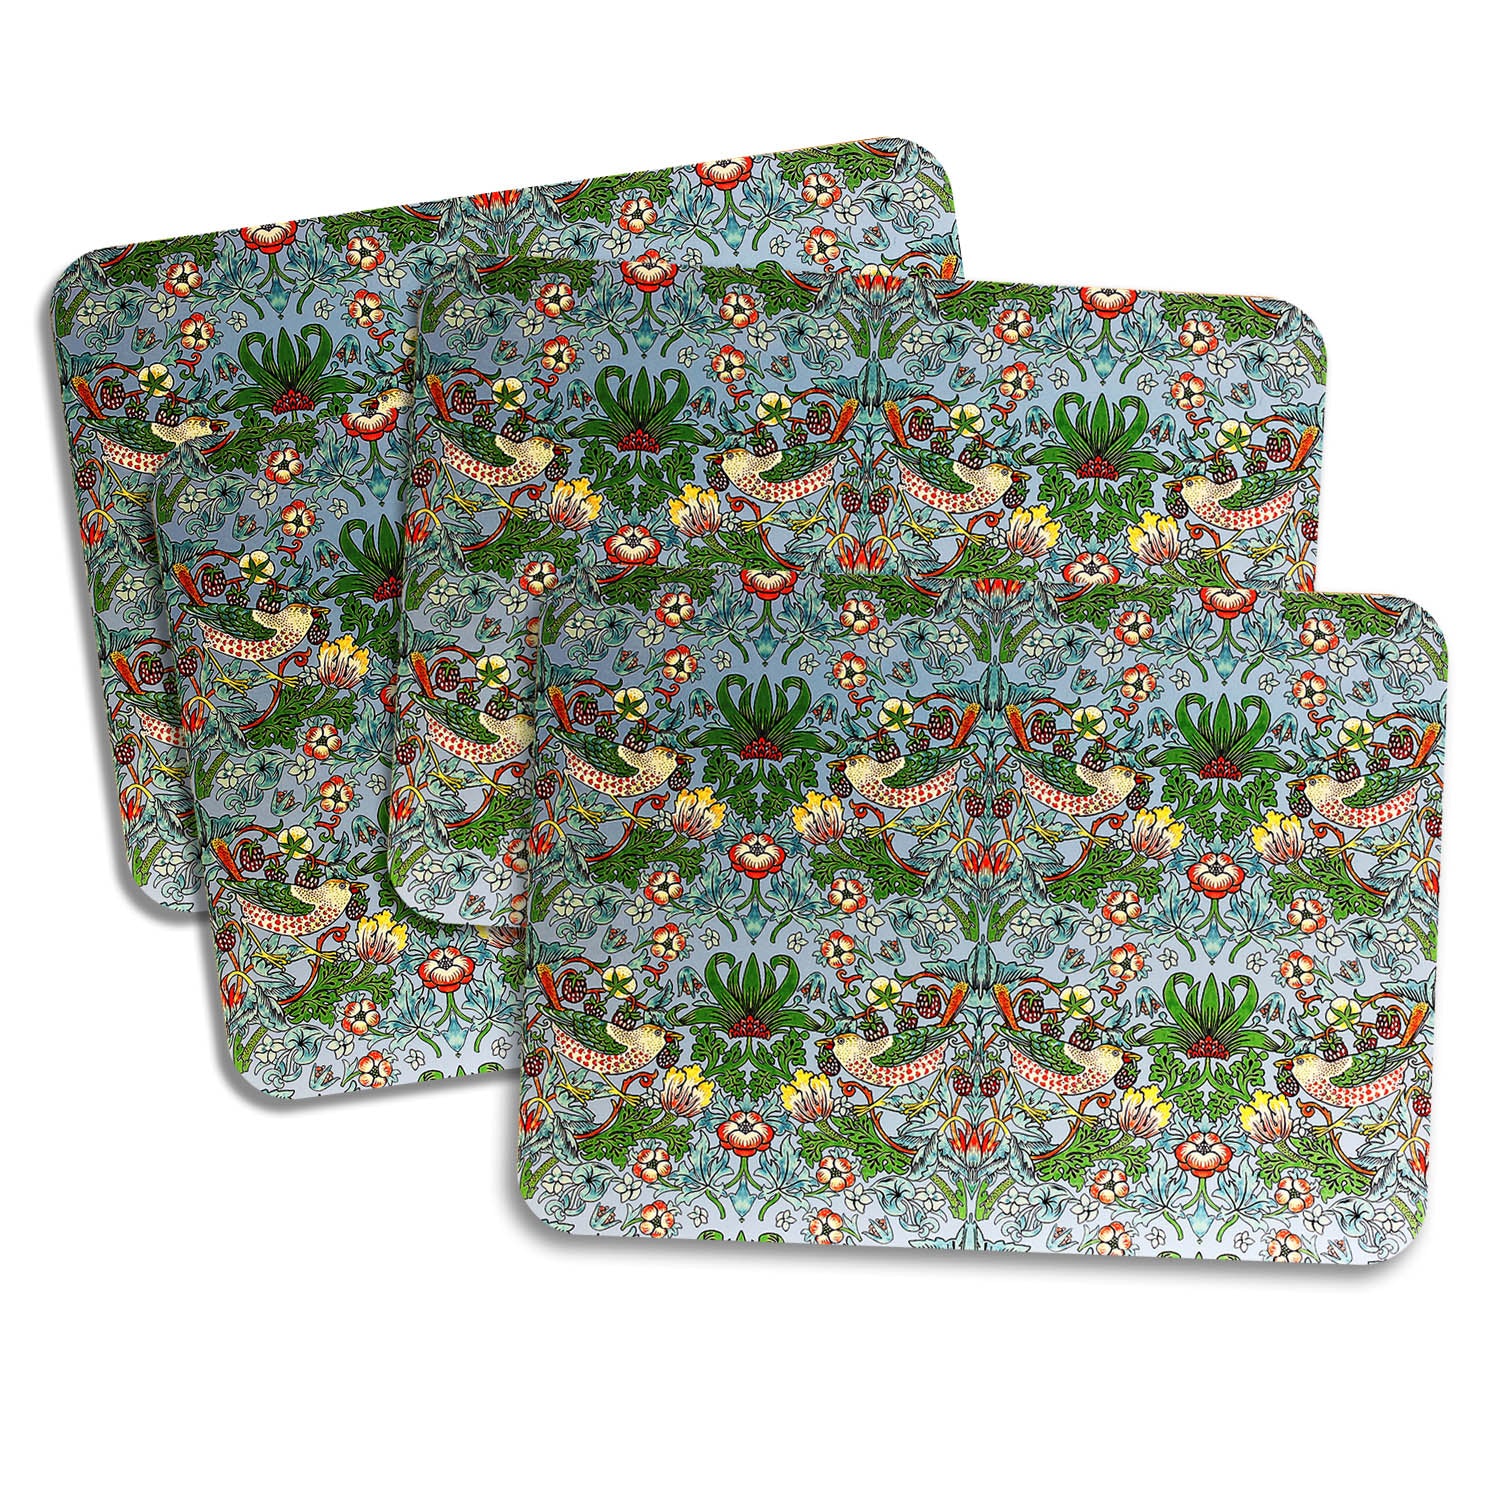 Set of 4 Strawberry Thief Teal Placemats Cork Backed